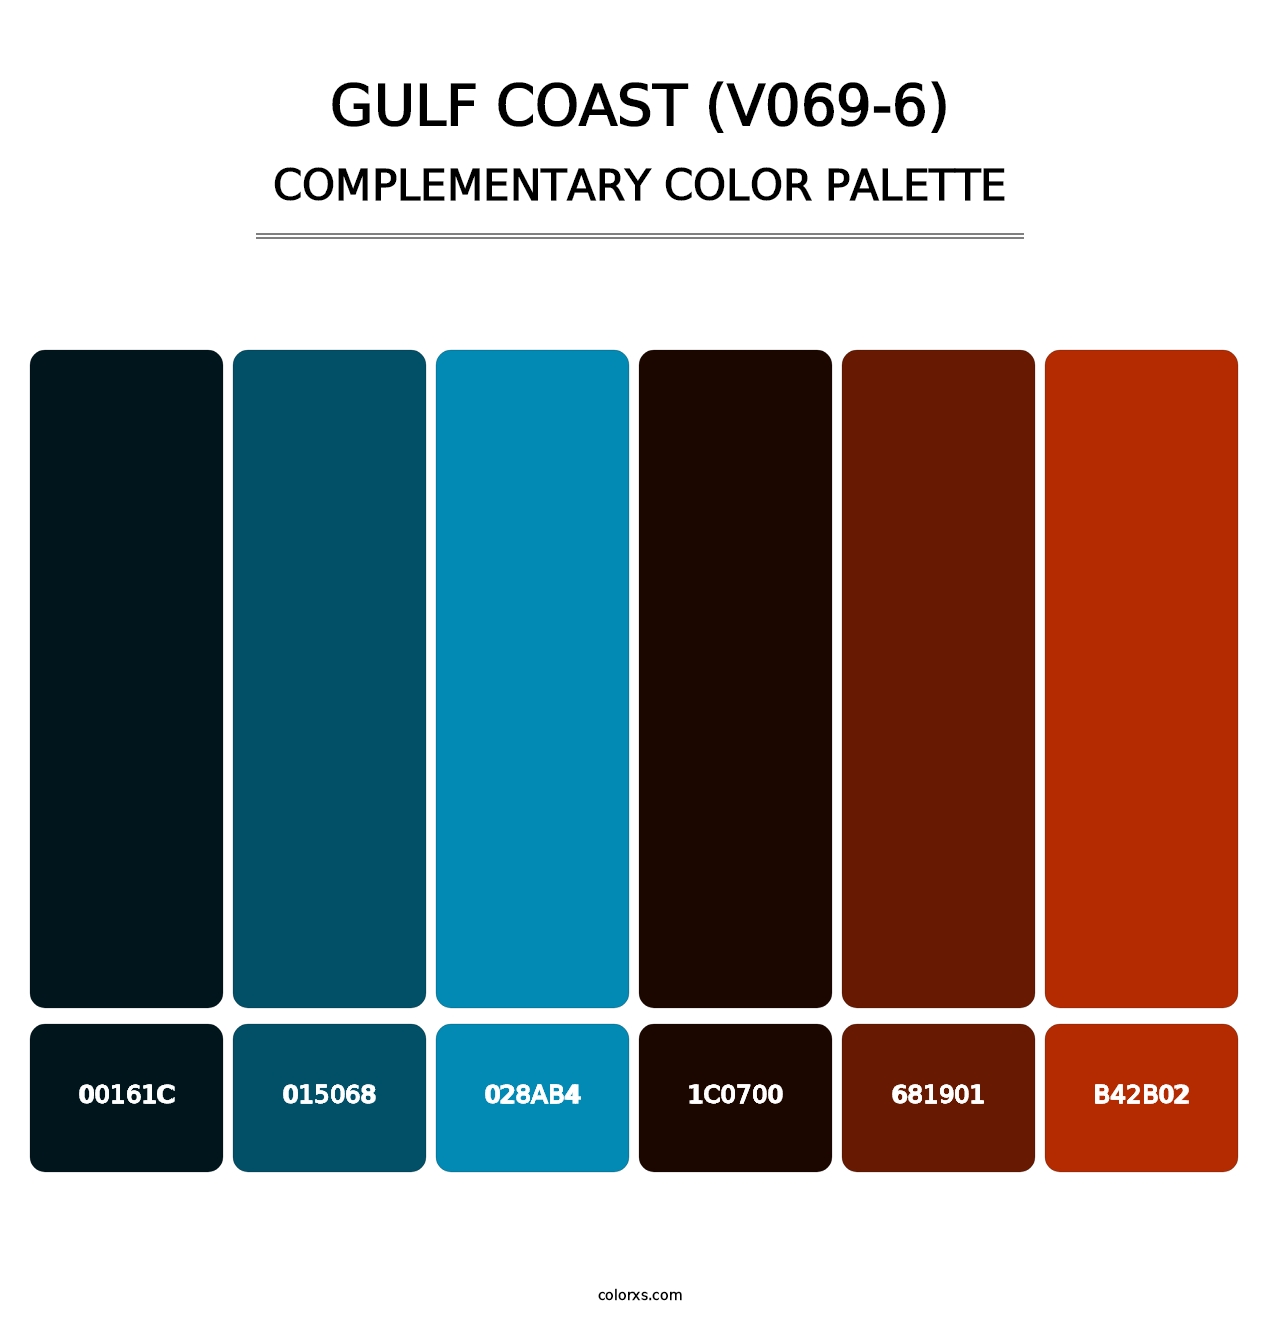 Gulf Coast (V069-6) - Complementary Color Palette